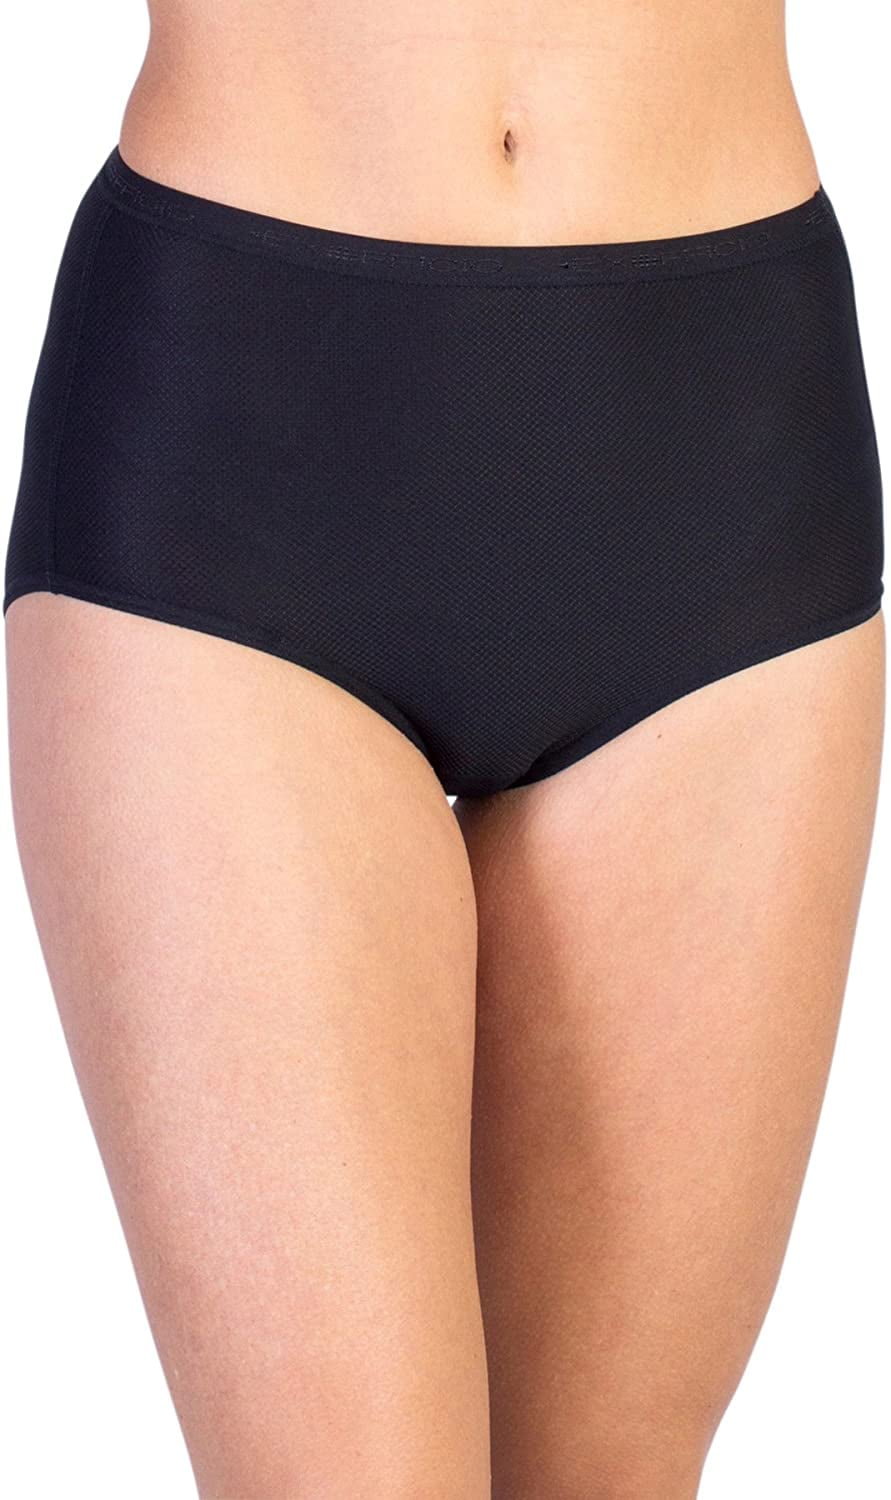 ExOfficio Give-n-go Lacy Thong Black XL for sale online 